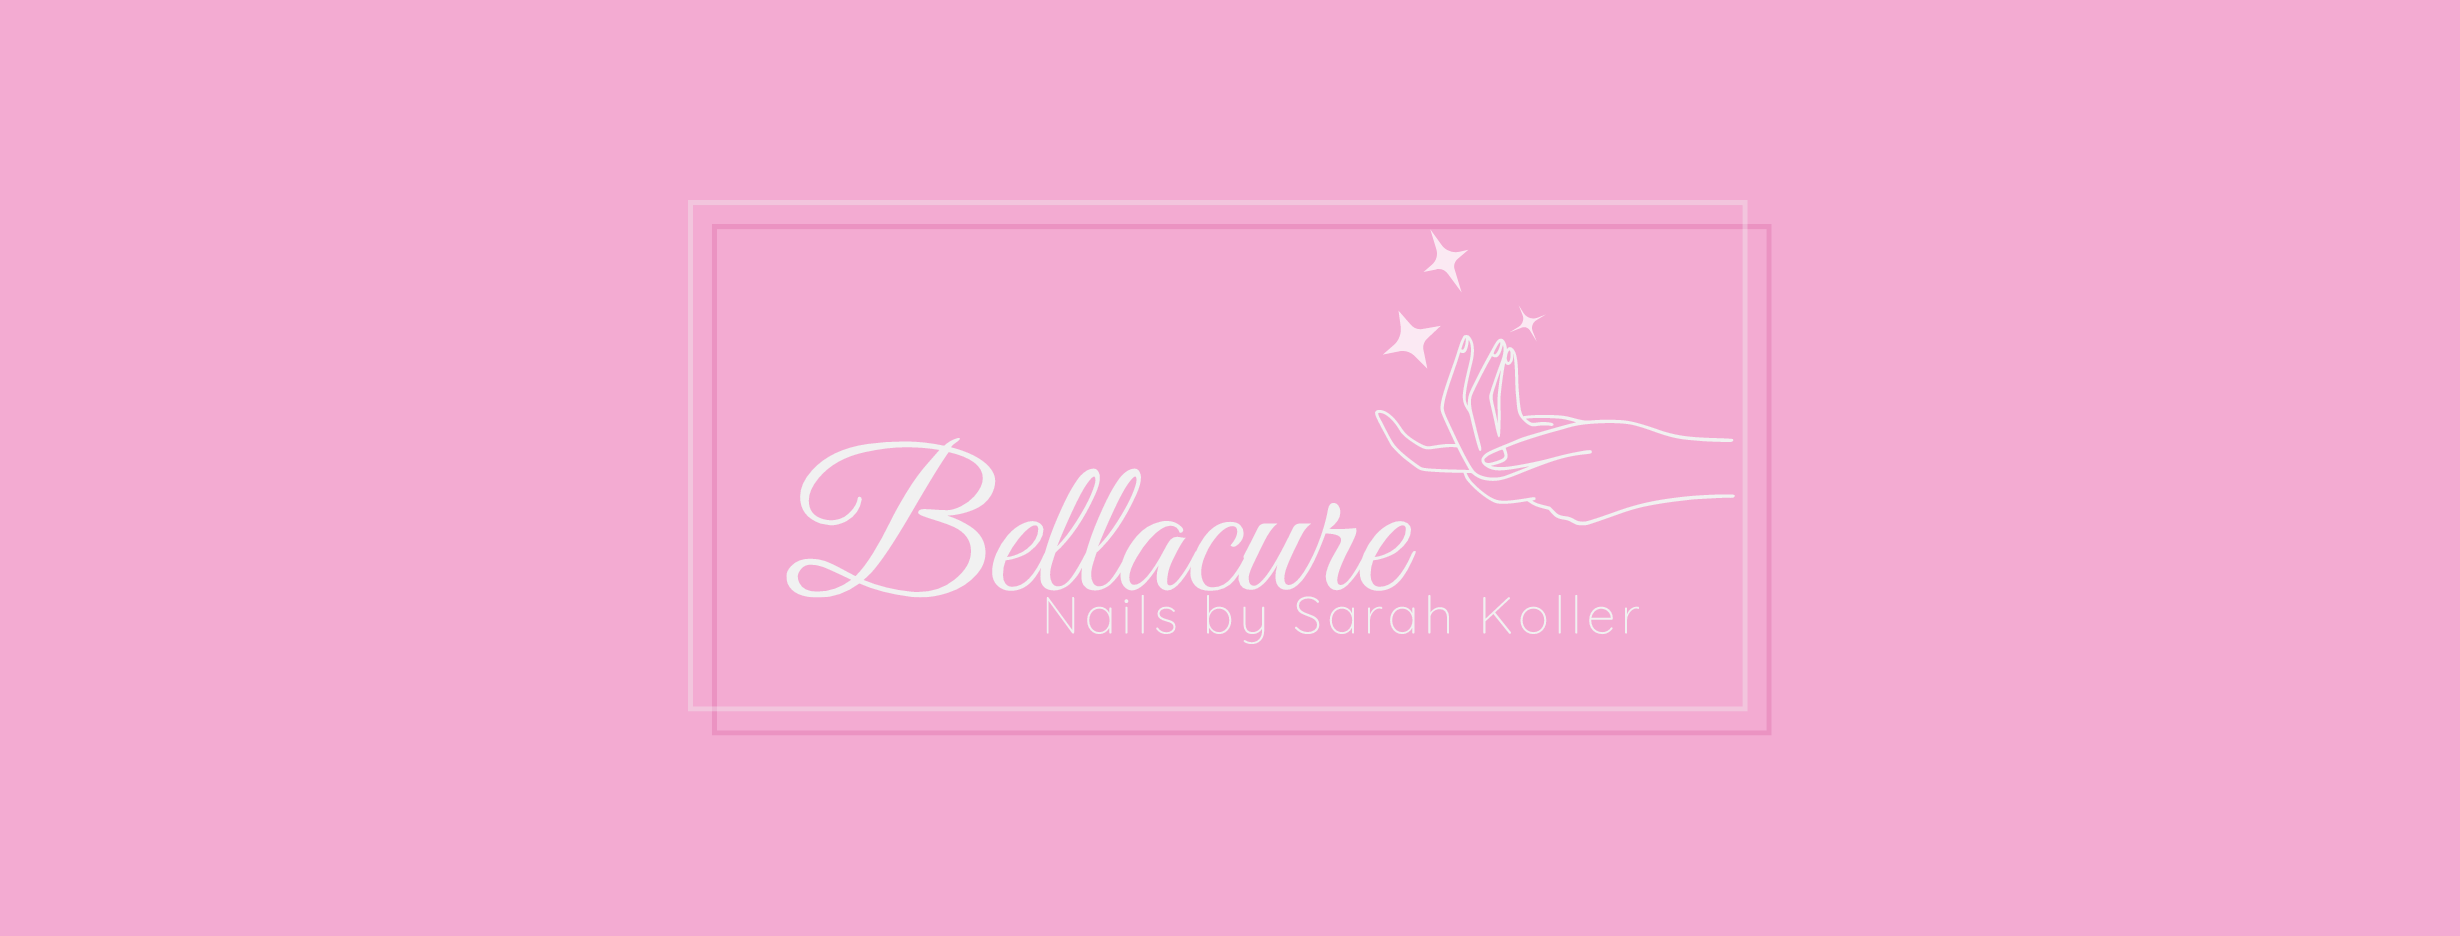 Bellacure Nails by Sarah Koller